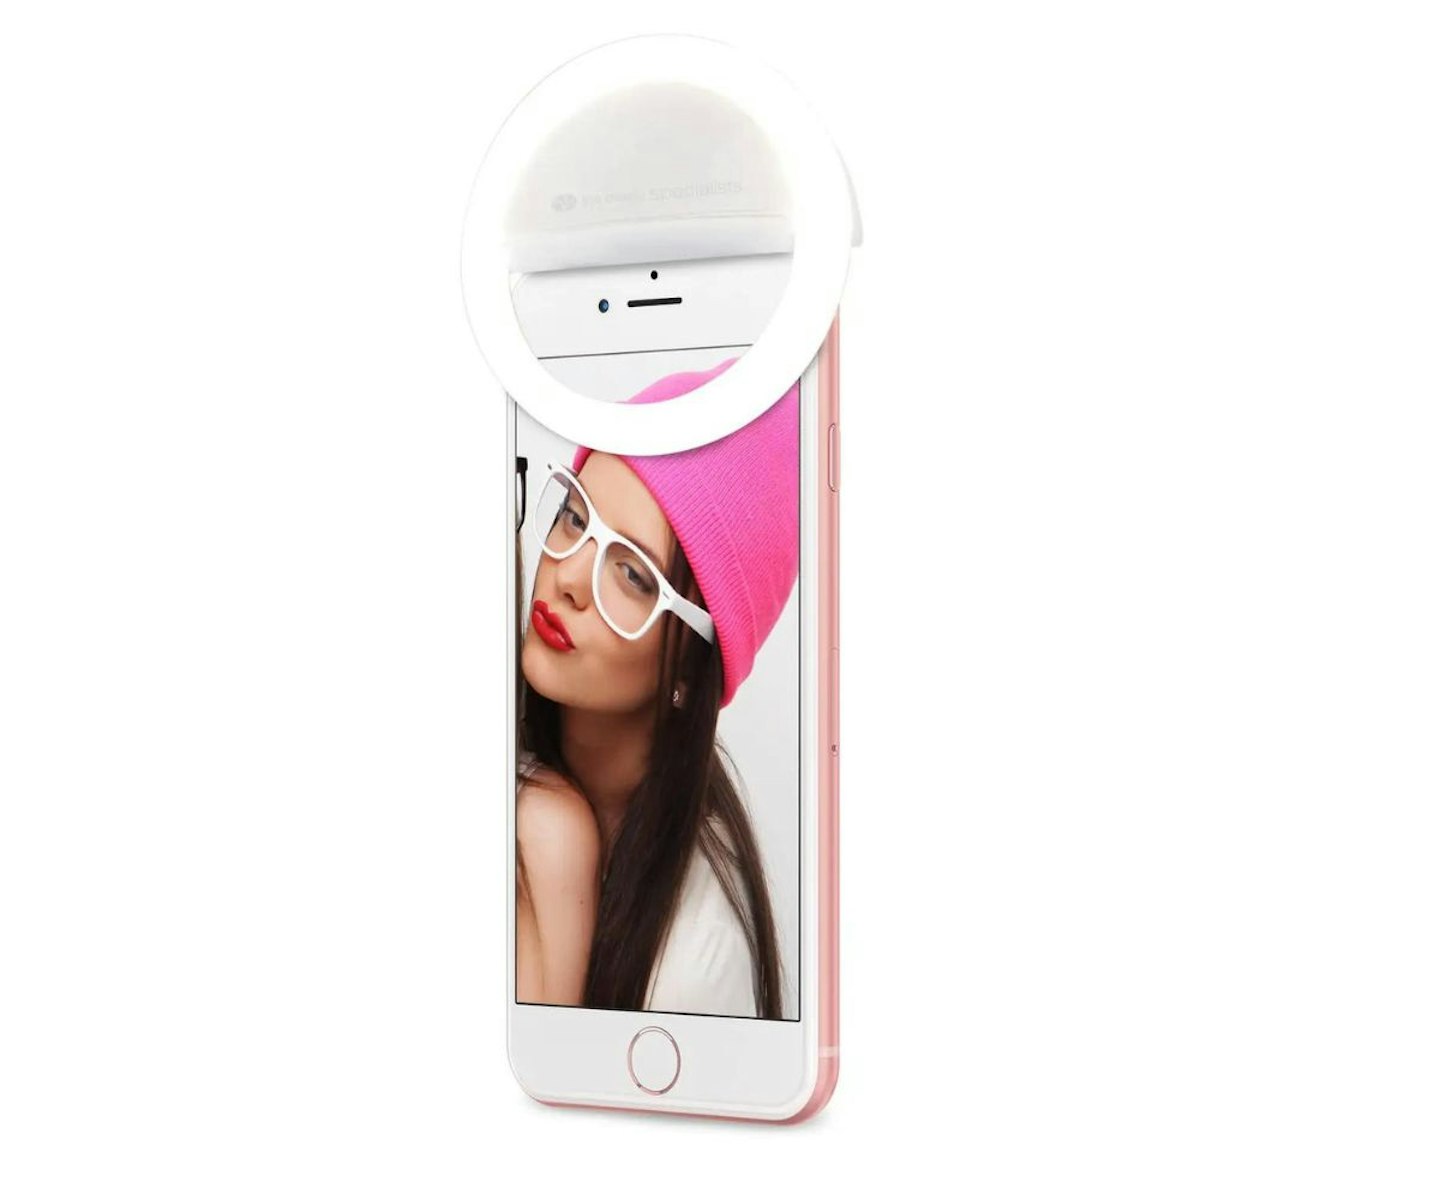 Rio Beauty Glow Selfie and Vlogging Smartphone Ring Light